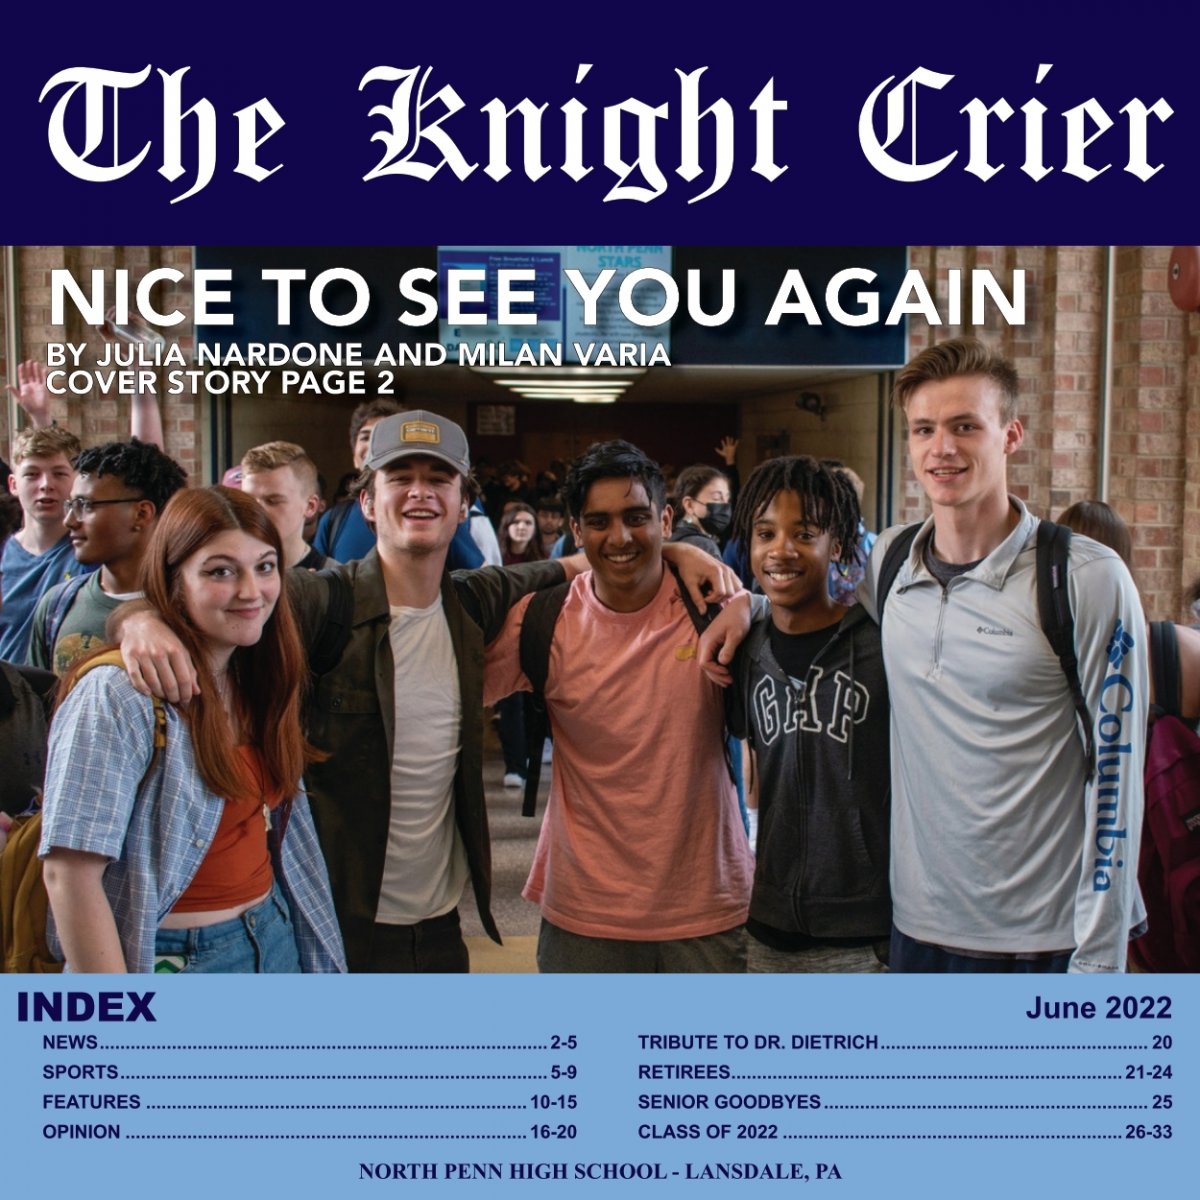 Turner becomes an earner – The Knight Crier